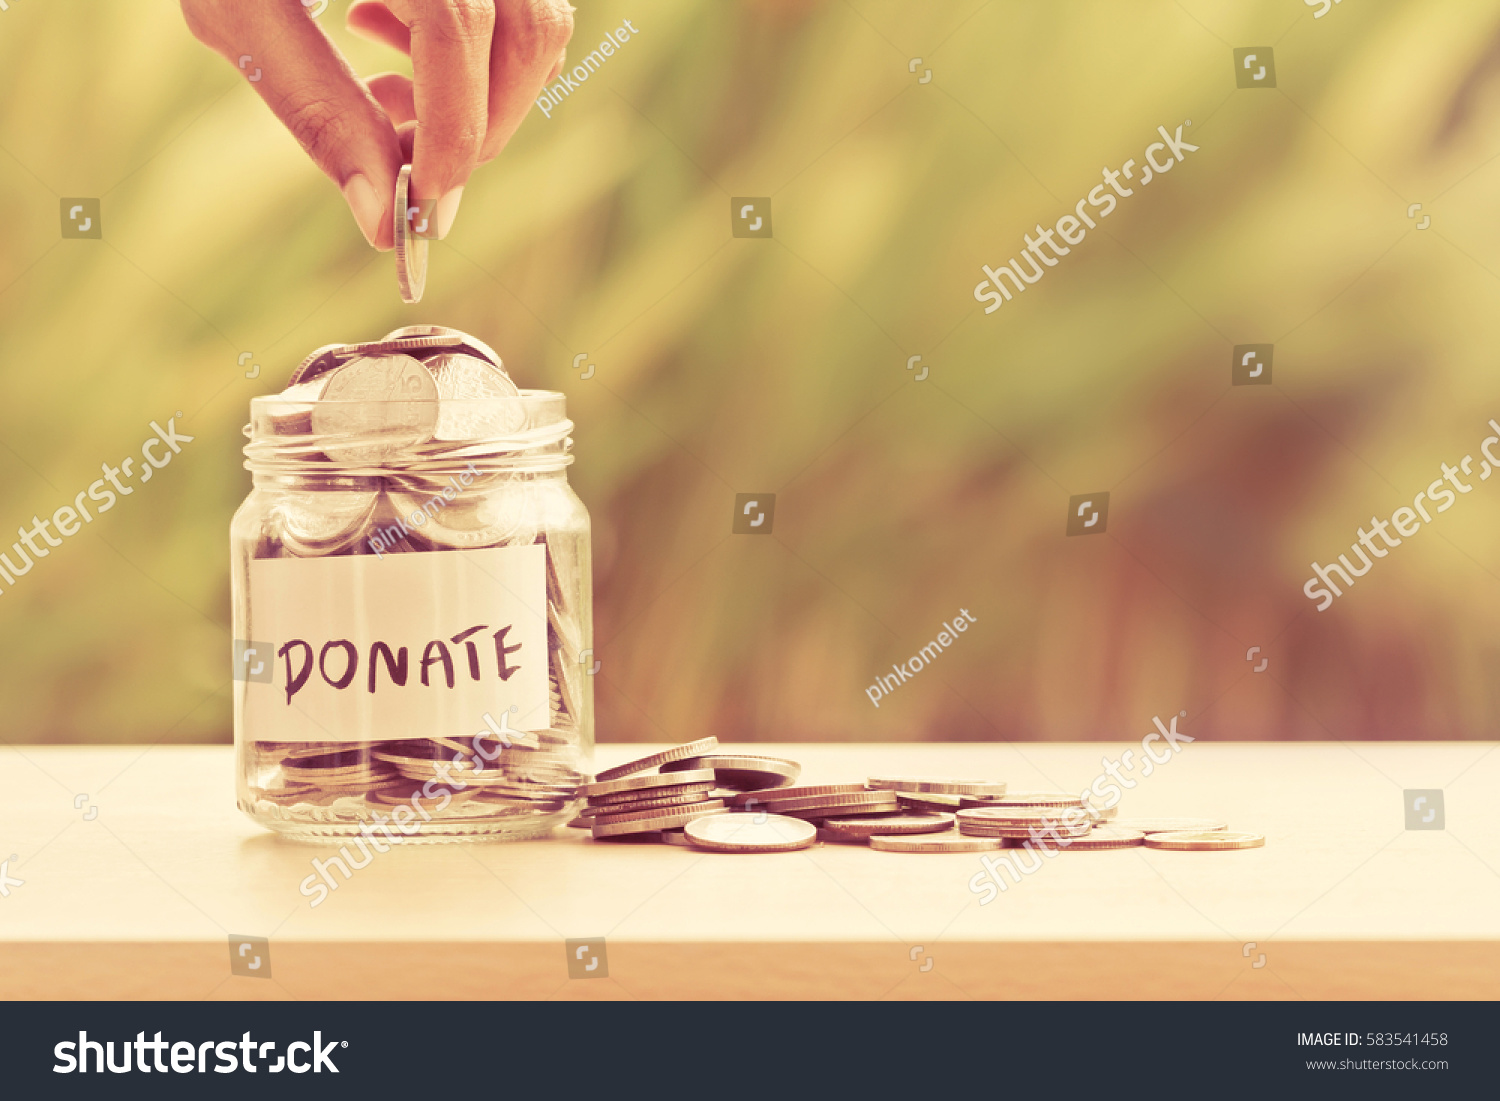 Hand putting Coins in glass jar with DONATE word written text label for giving and donation concept #583541458